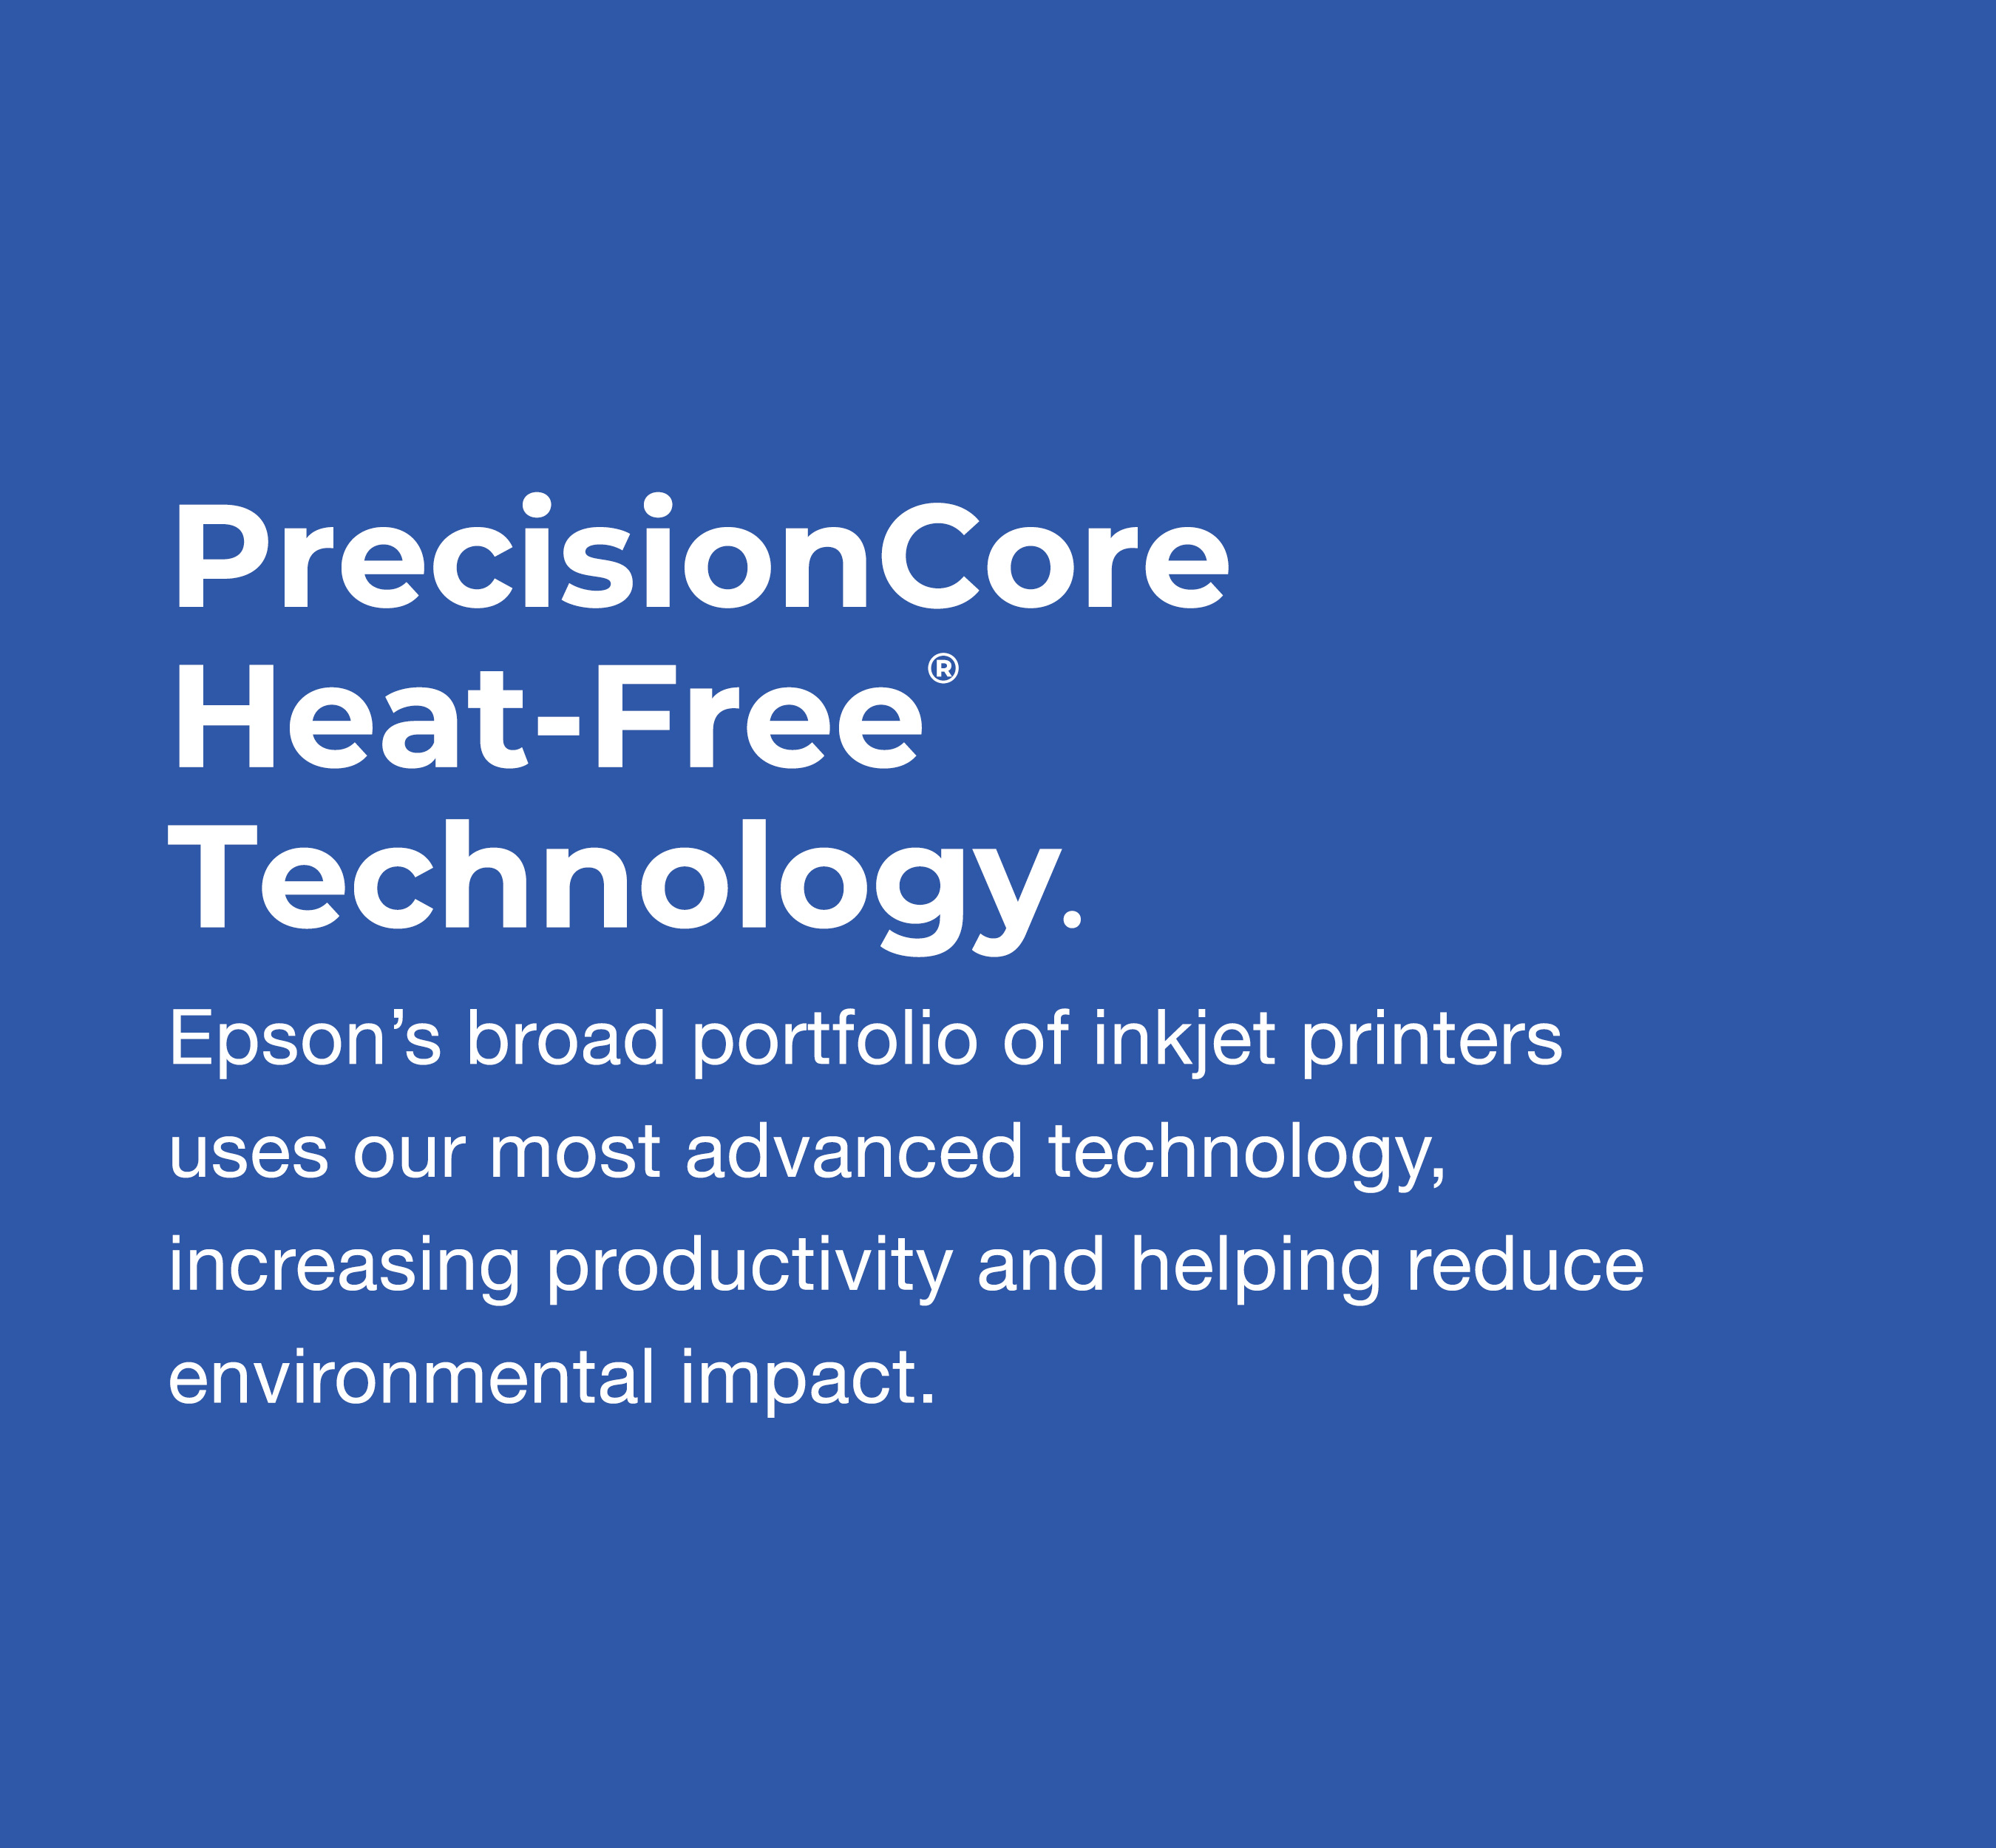 Increase Productivity & Save Energy with Heat-Free Printing Technology. Our broad portfolio of inkjet printers use Epson’s most advanced heat-free technology that increases productivity and helps reduce environmental impact.